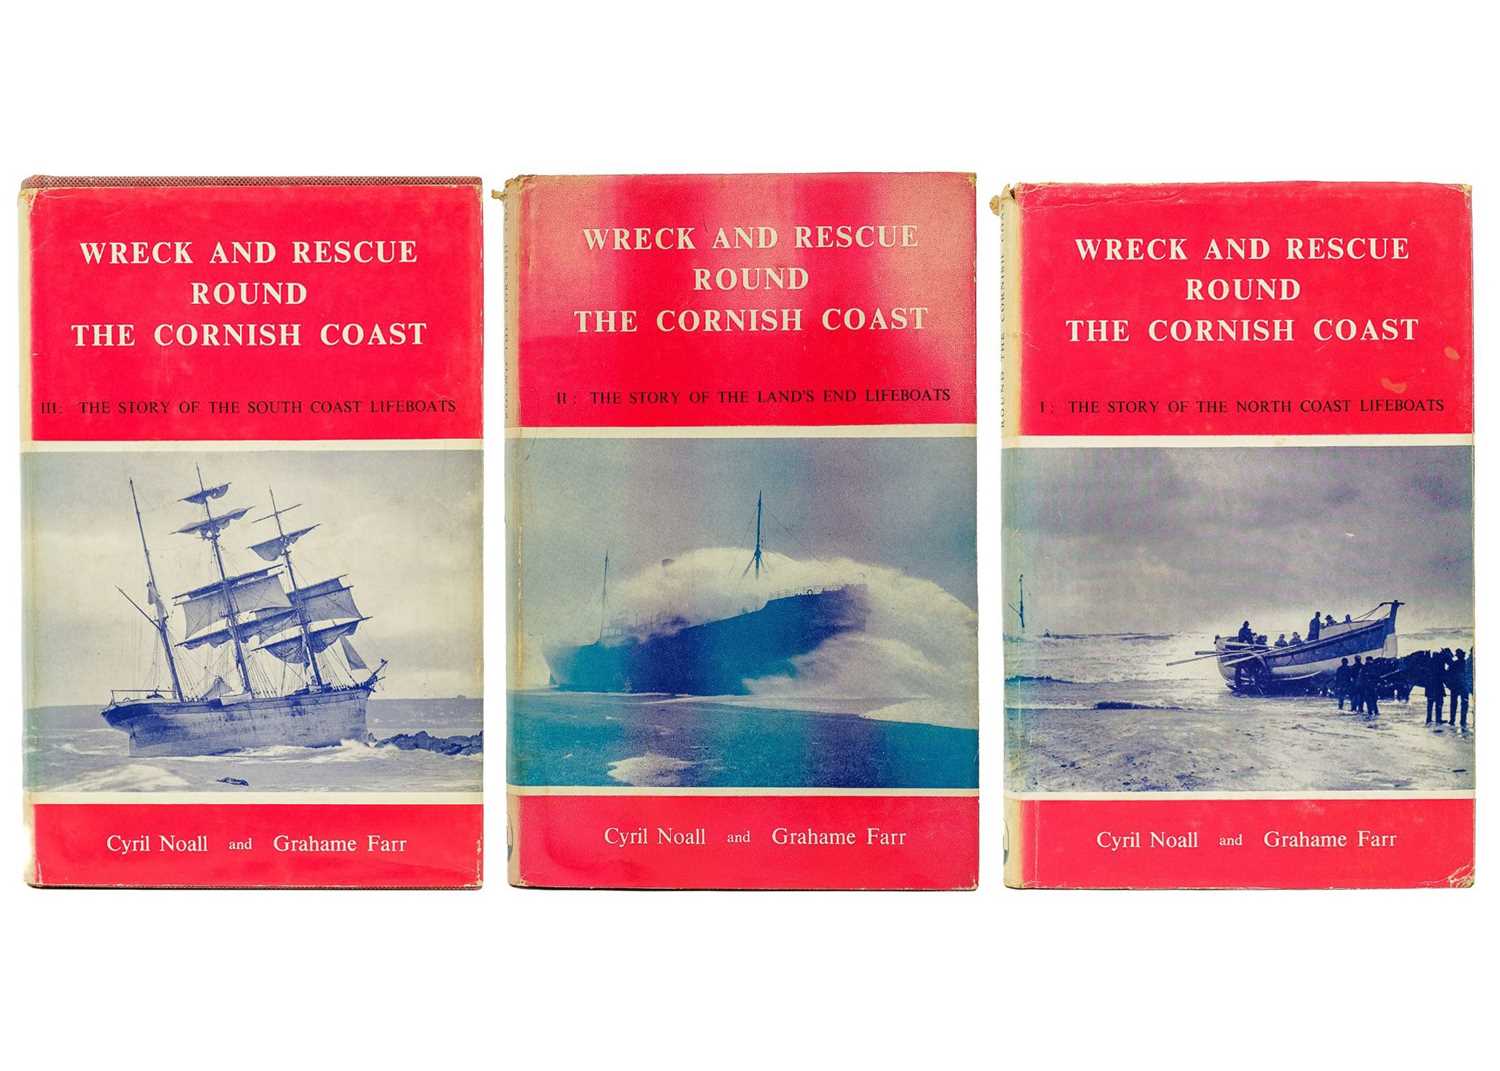 NOALL, Cyril and FARR, Grahame 'Wreck And Rescue Round The Cornish Coast', three book-set